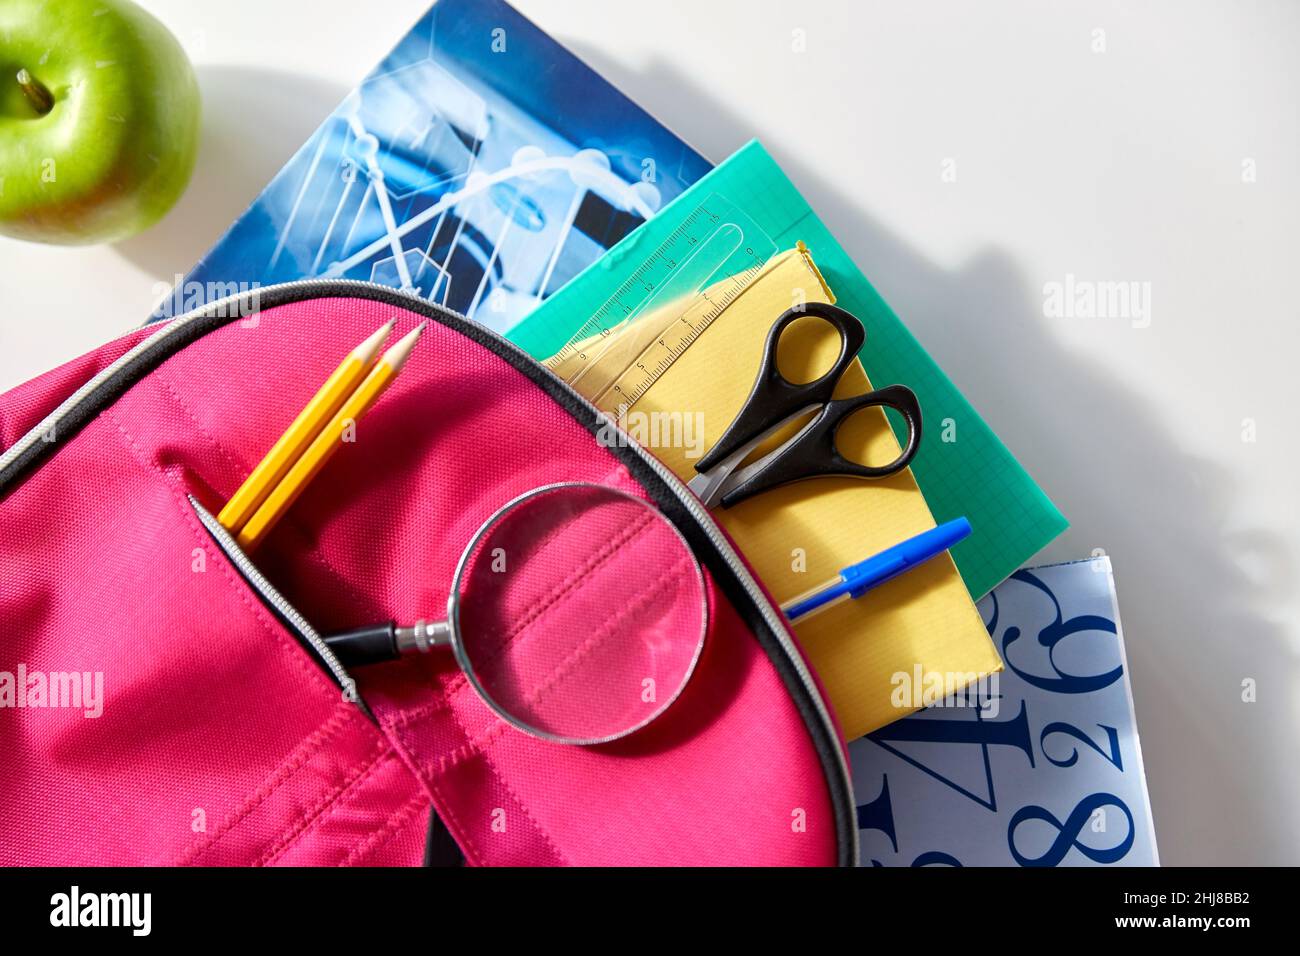 backpack with books, school supplies and apple Stock Photo